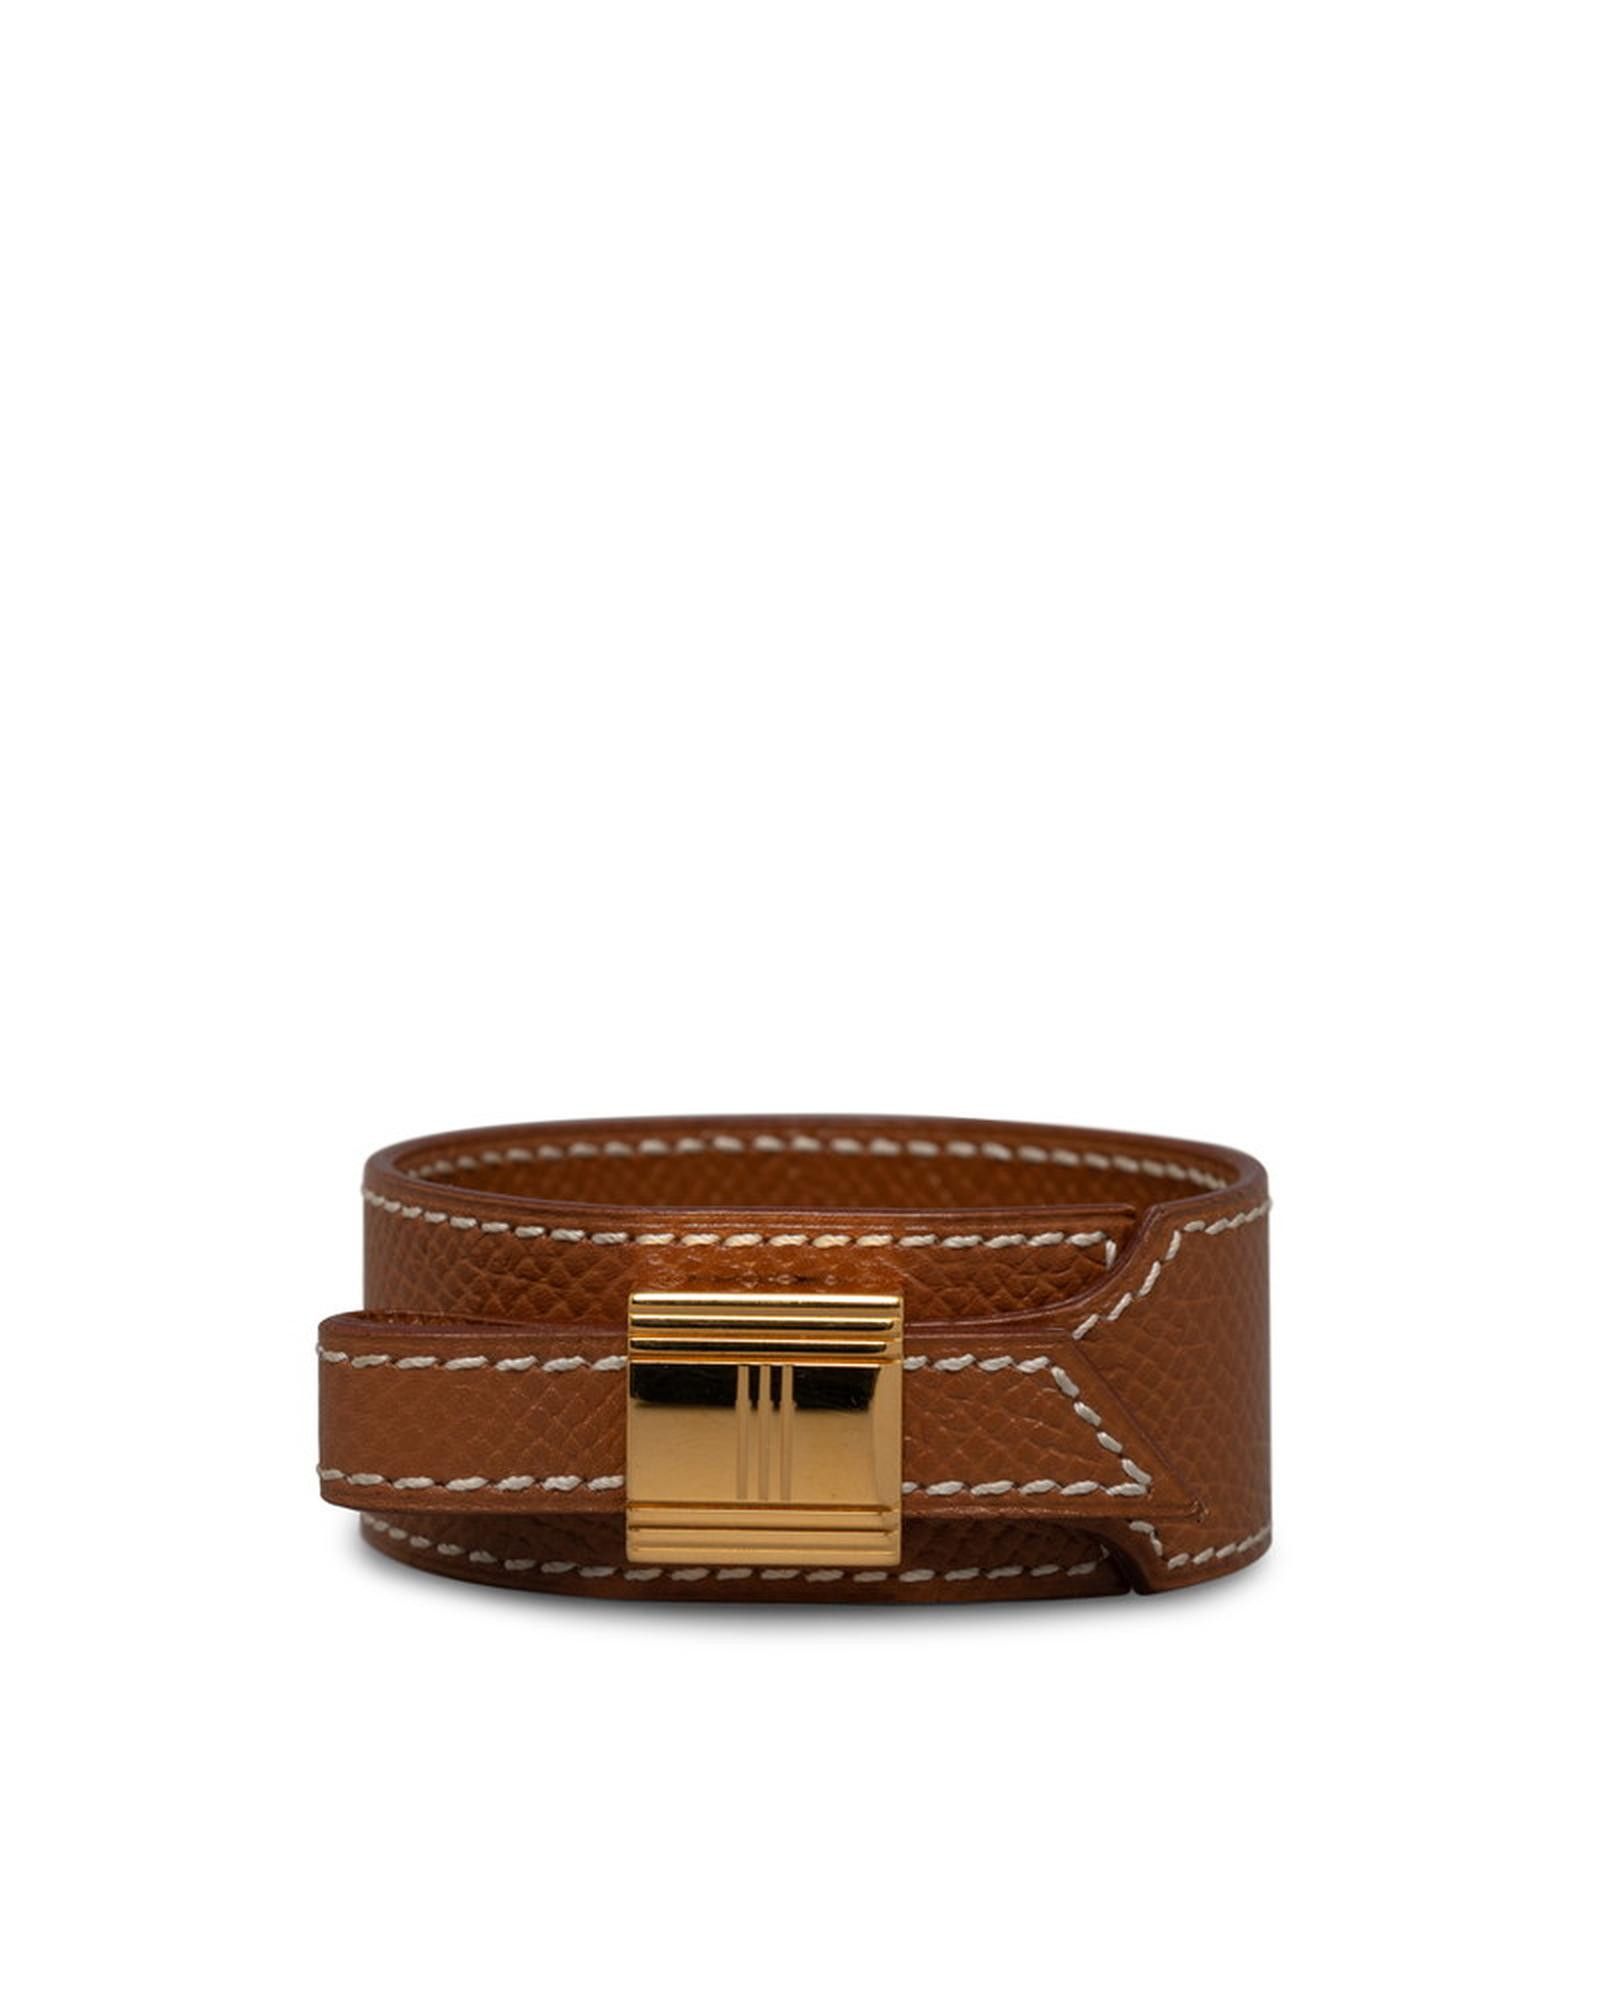 image of Hermes Braided Leather Wrap Bracelet in Brown, Women's